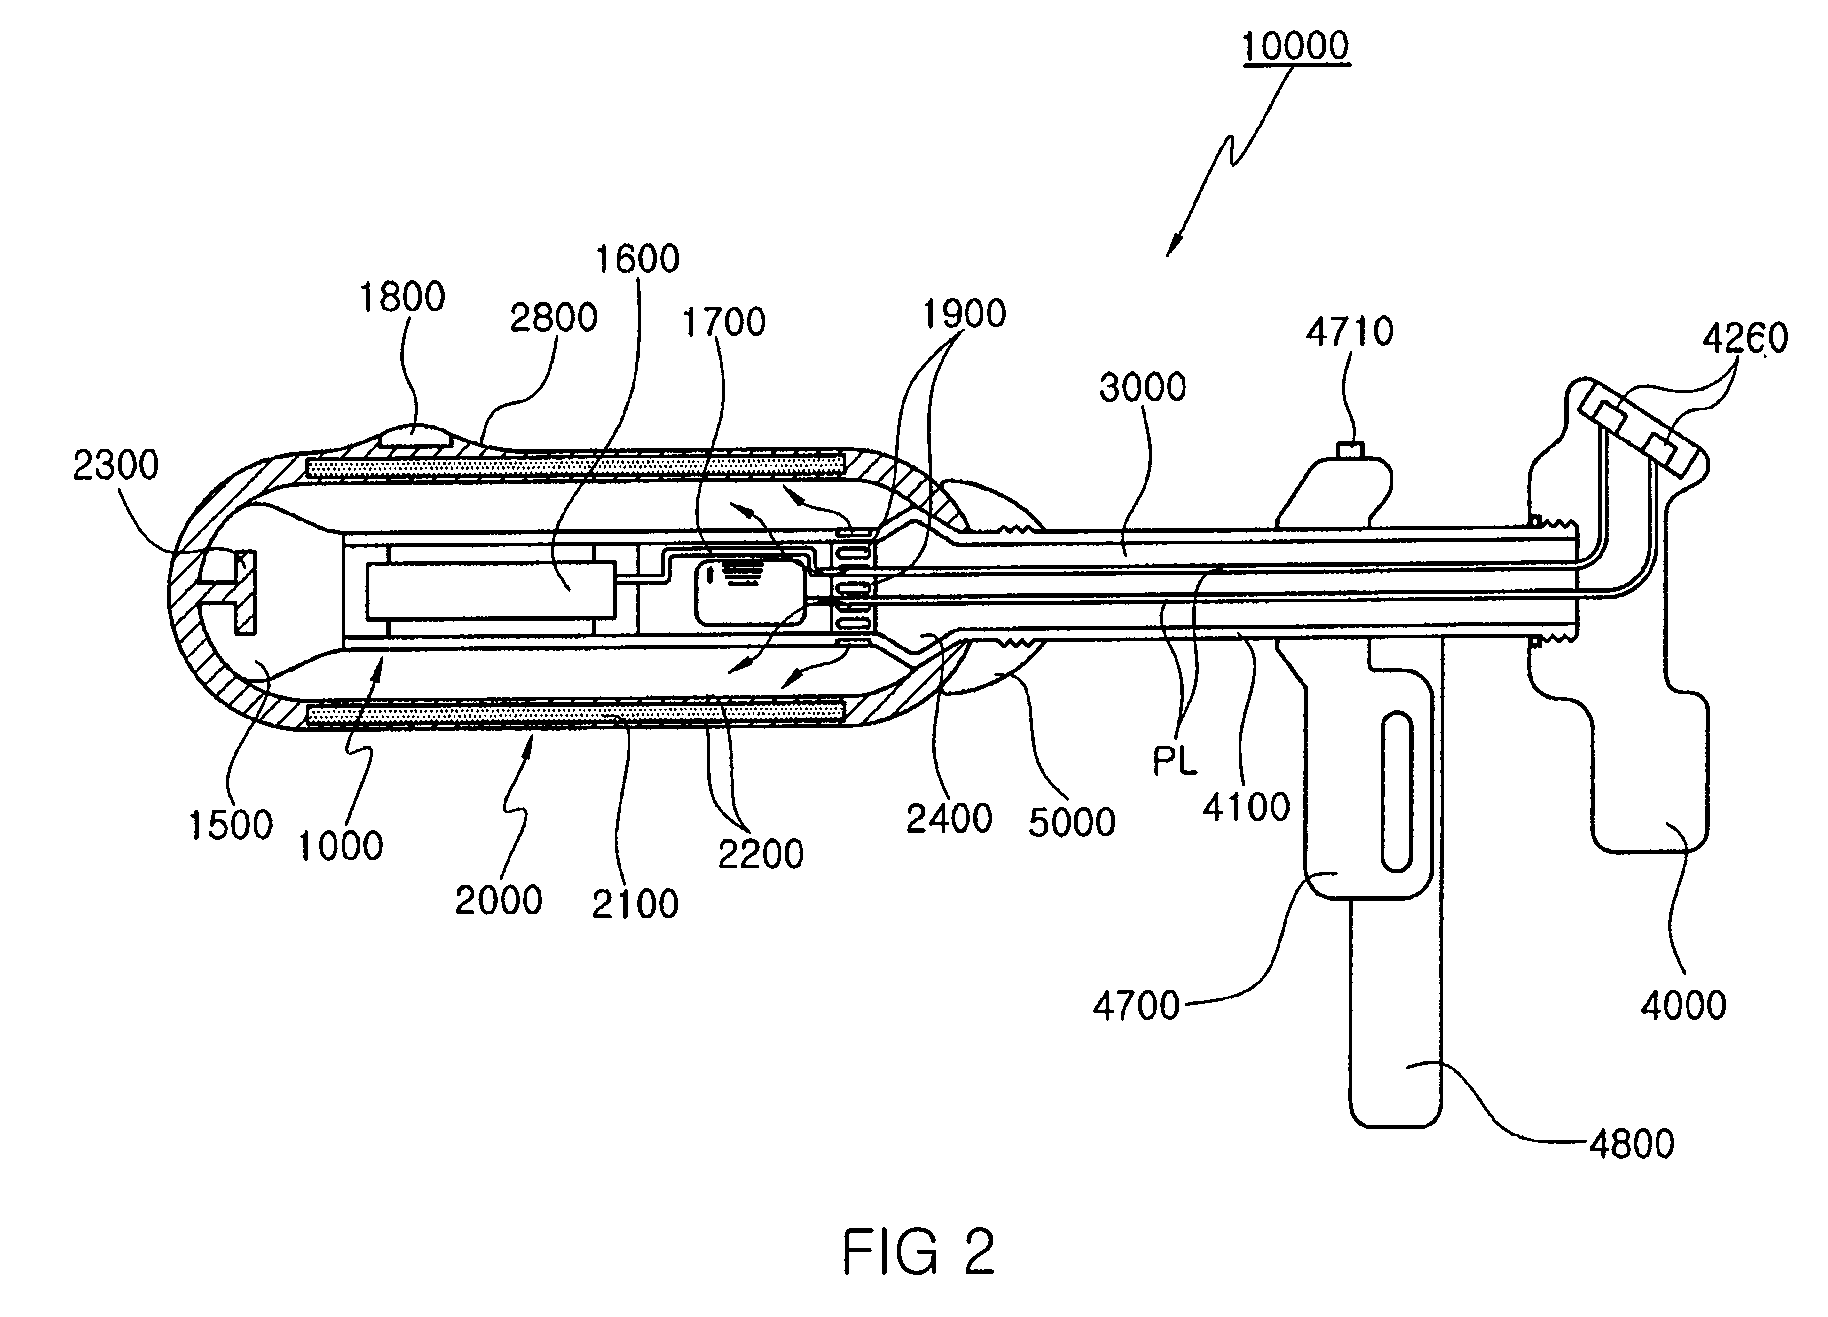 Apparatus for examining and curing urinary incontinence, and for exercising bio-feedback of women vagina muscles